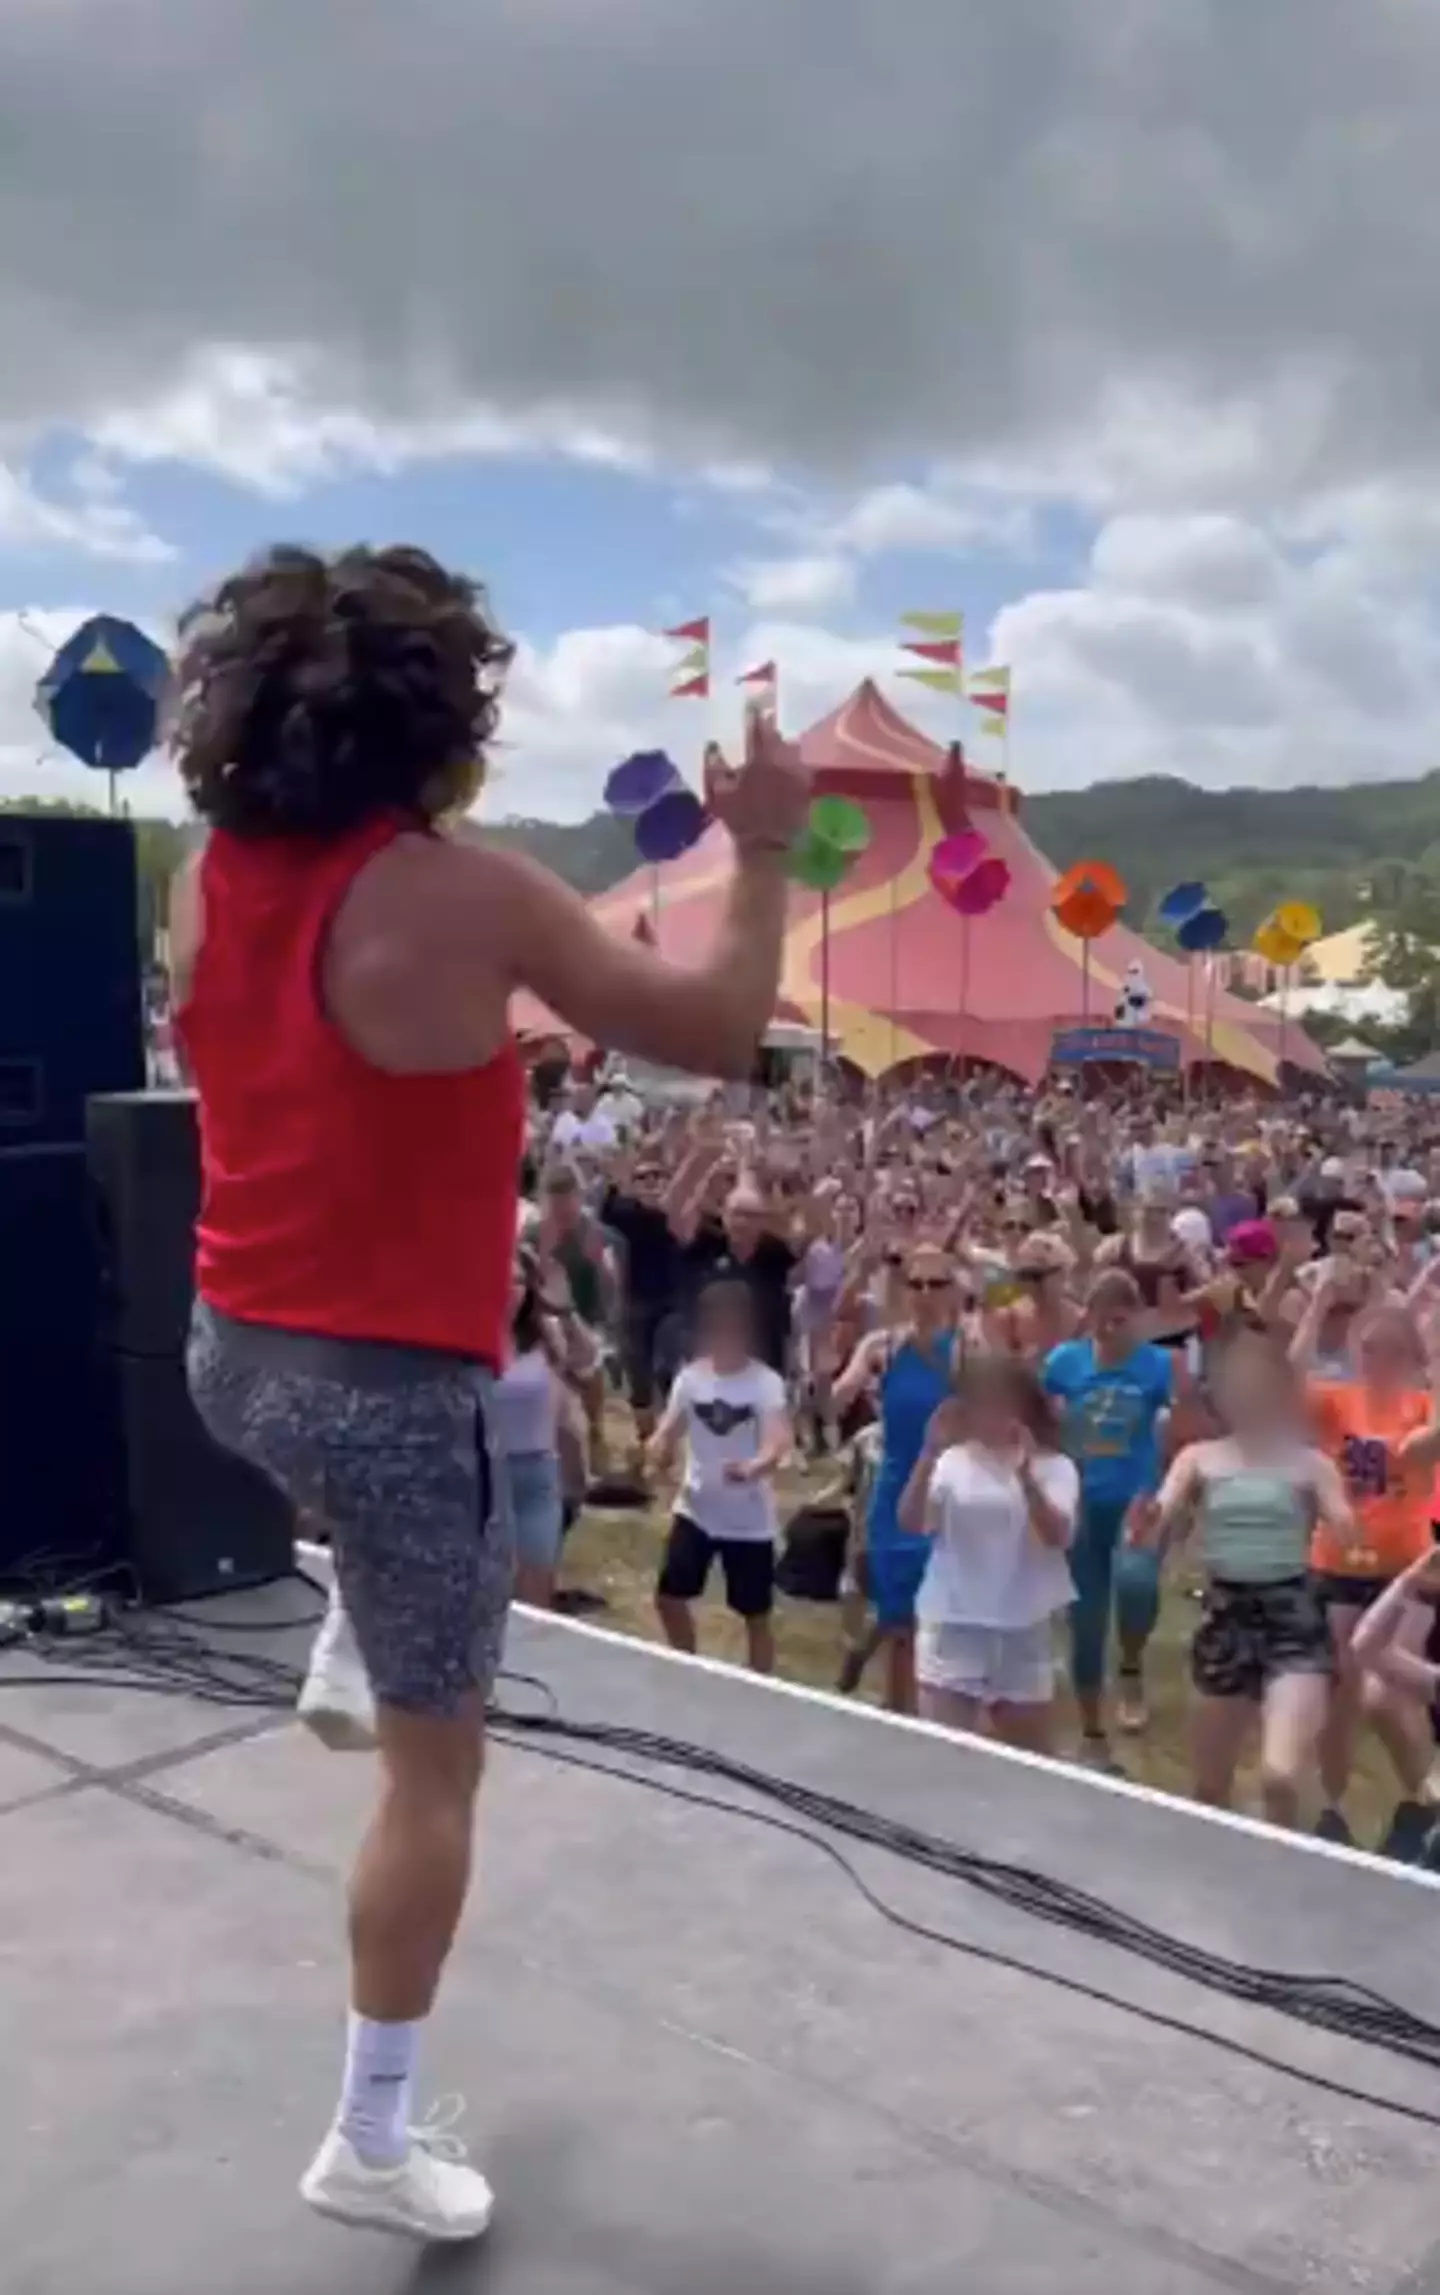 Joe Wicks led Glasto fans in a morning workout (X/@thebodycoach)